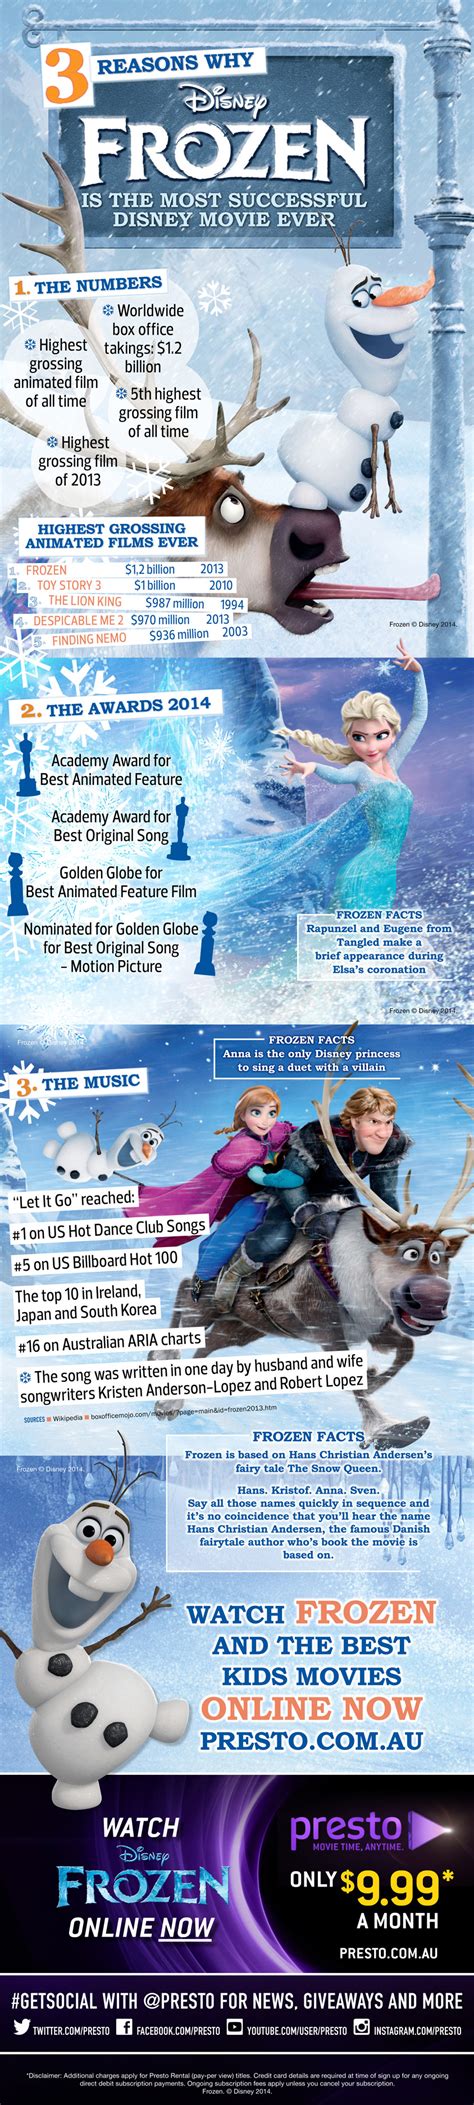 Disney's movie releases for 2020 include a bit of everything: Infographic: Why Frozen Is The Most Successful Disney ...